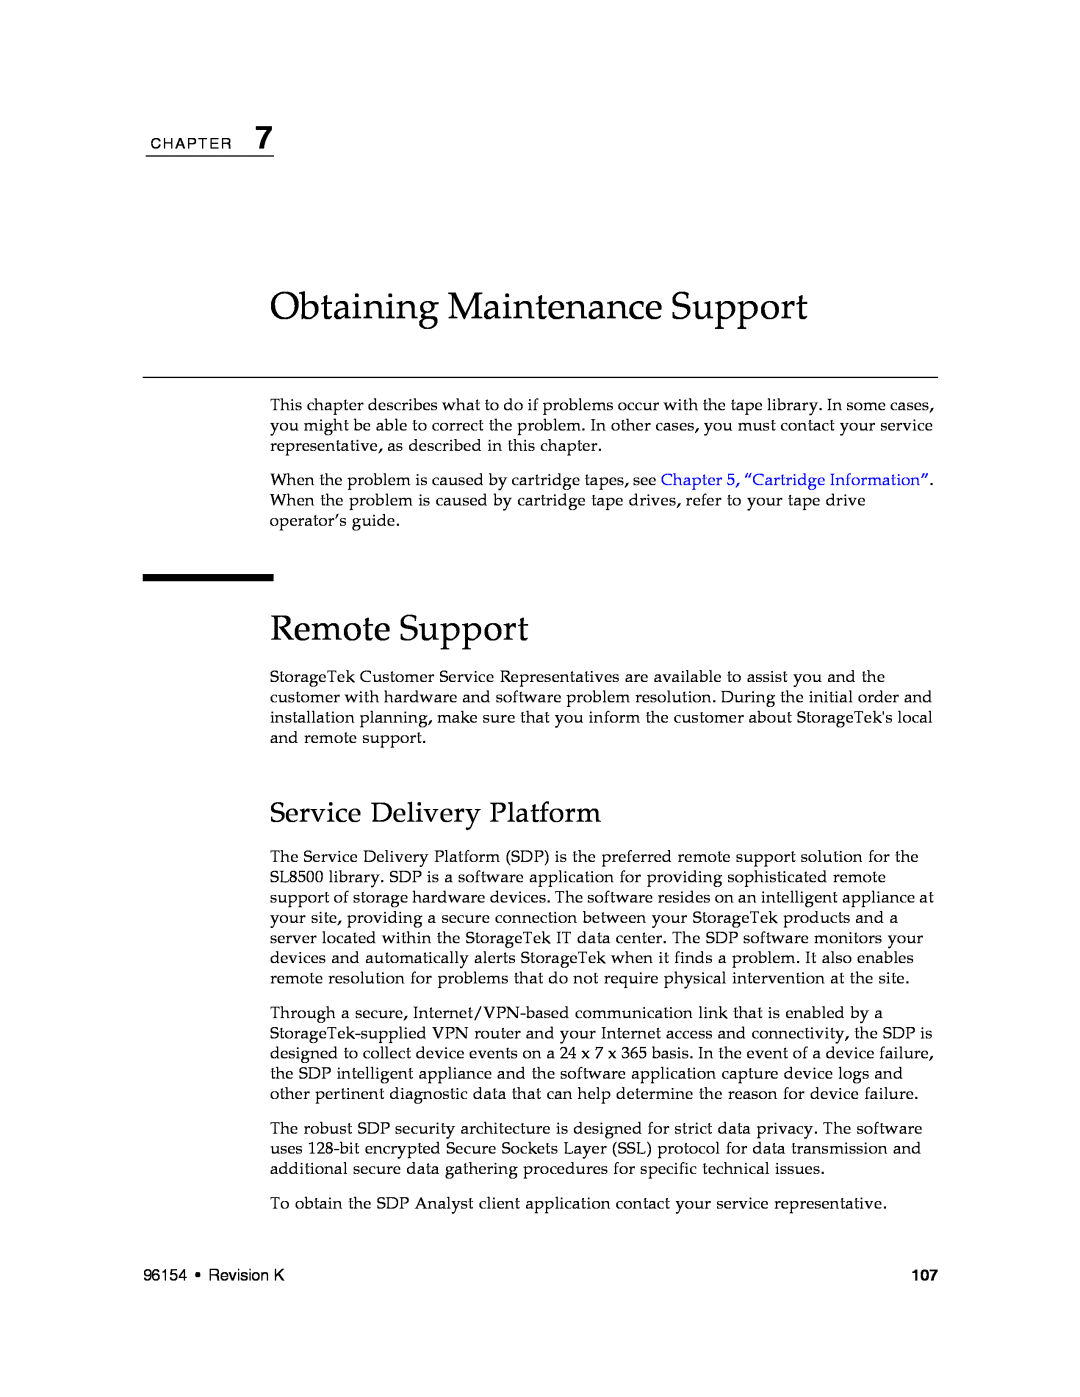 Sun Microsystems SL8500 manual Obtaining Maintenance Support, Remote Support, Service Delivery Platform 